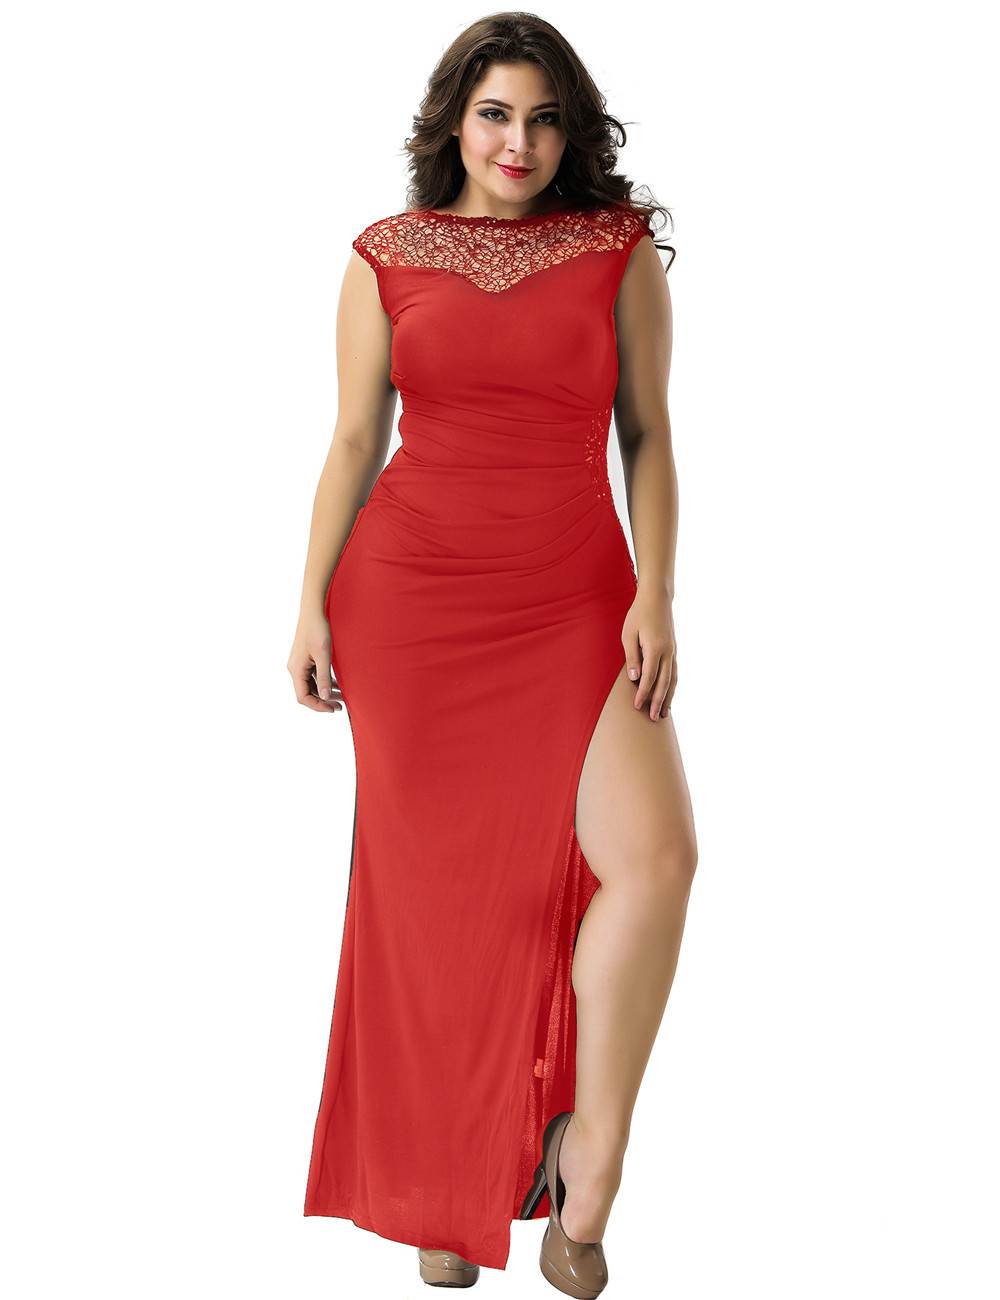 Newest fashion red evening dress with lace detail side in stock